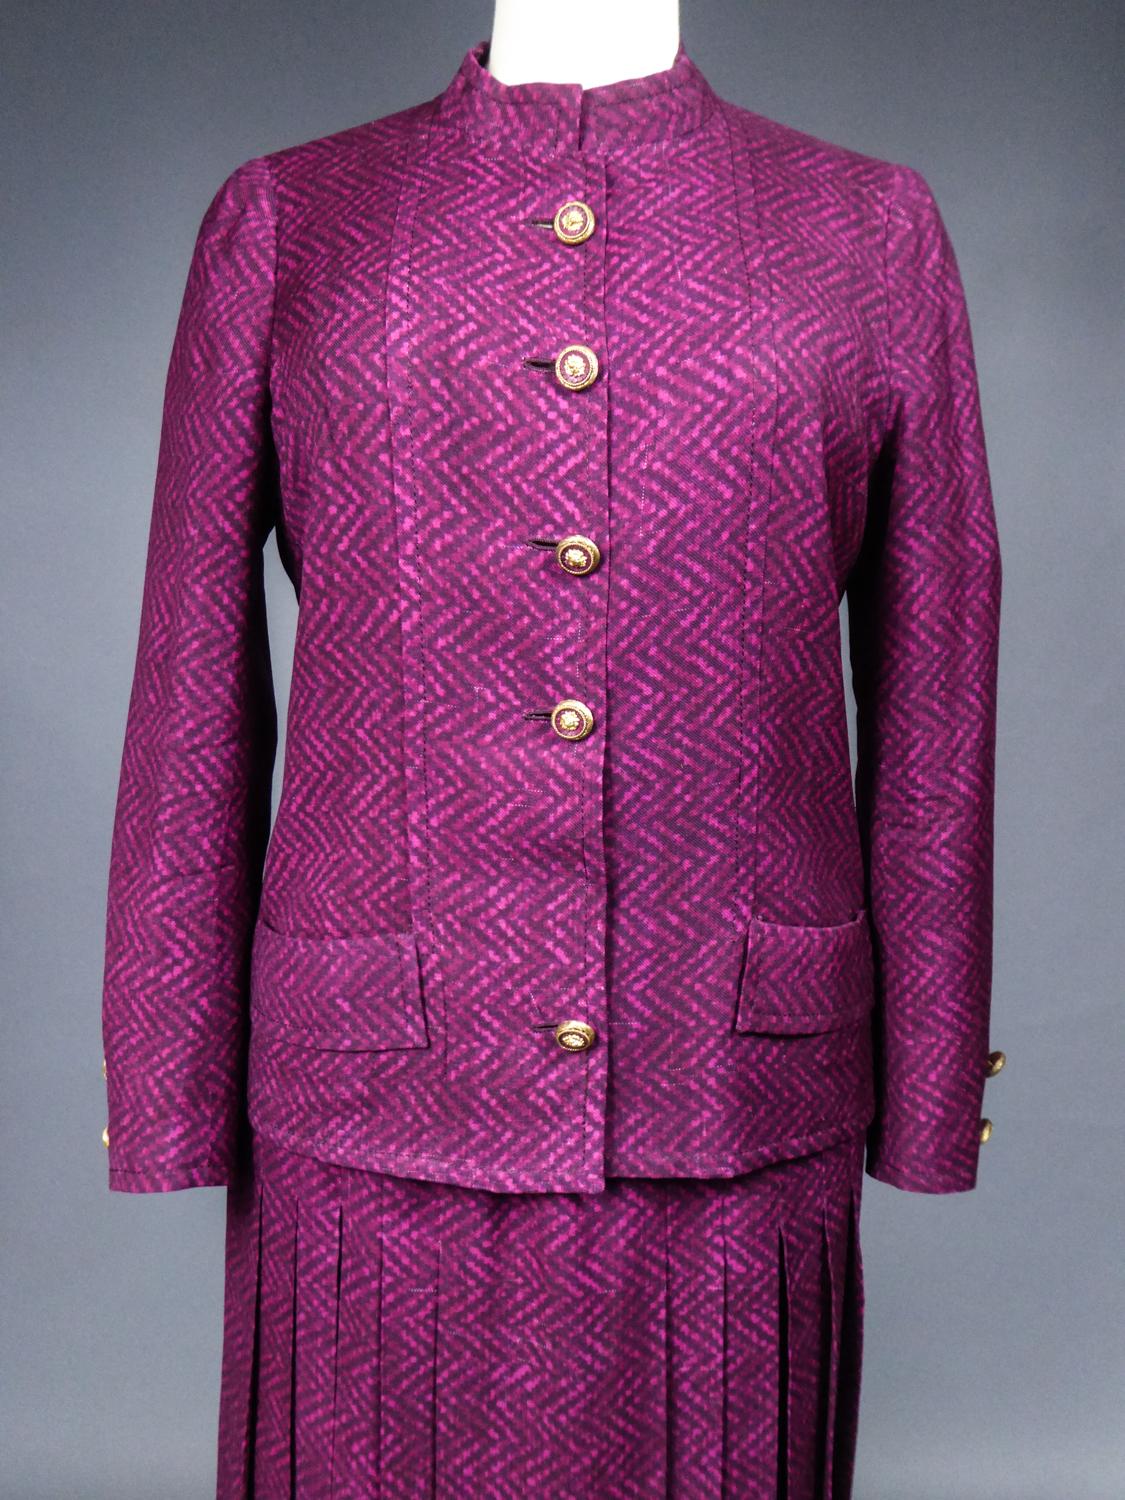 A French Couture Silk Chanel Skirt and Jacket Suit number 60423 & 60422 C. 1980 In Good Condition For Sale In Toulon, FR